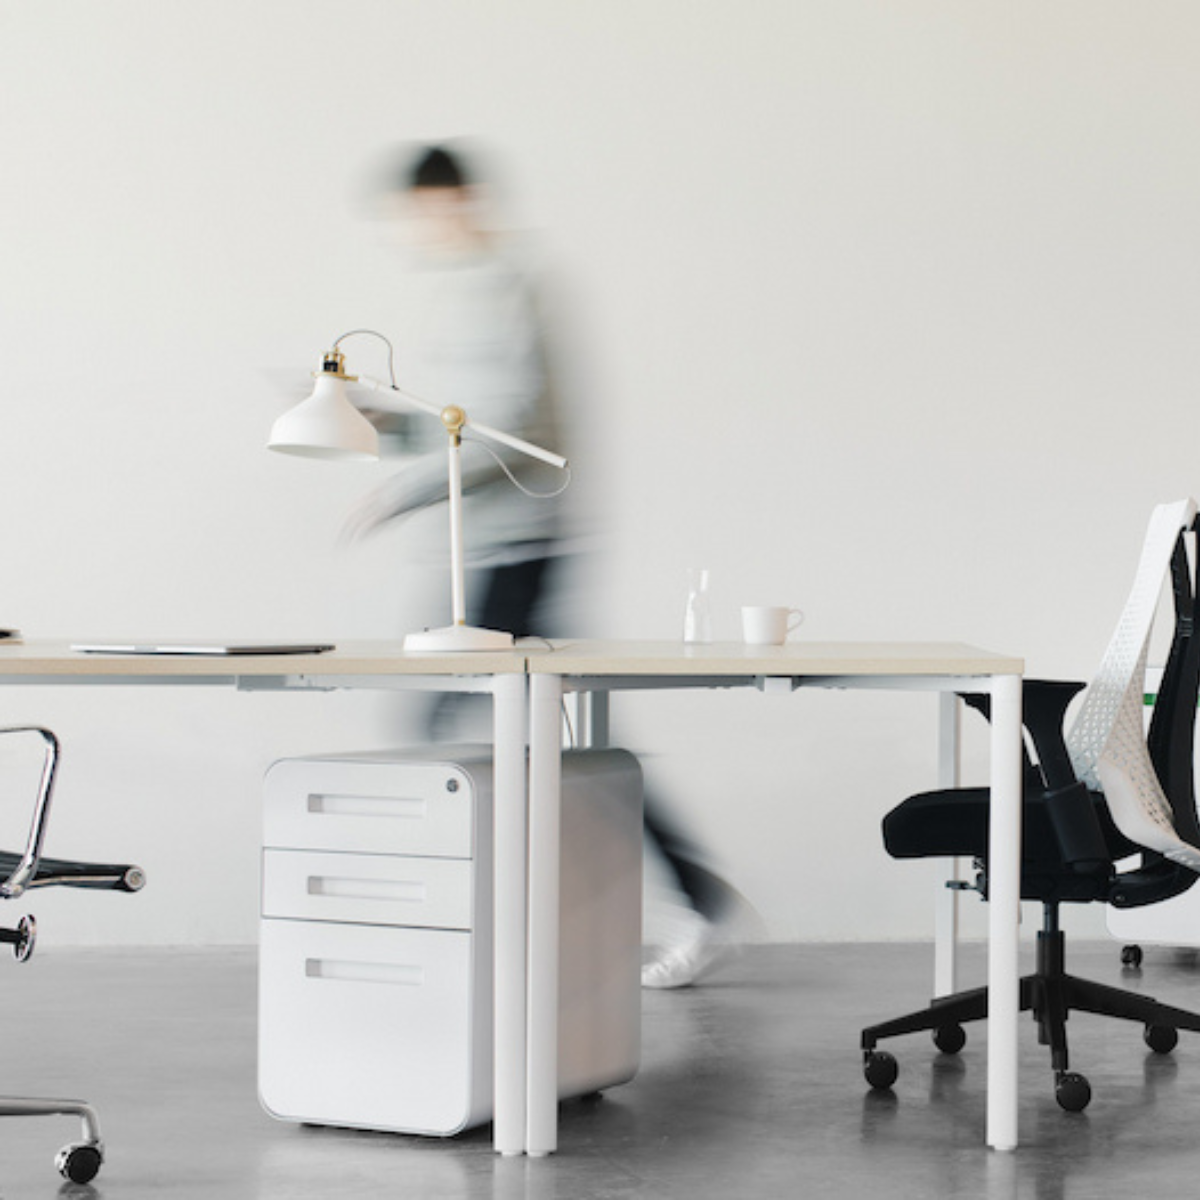 man walking fast in office blurred out